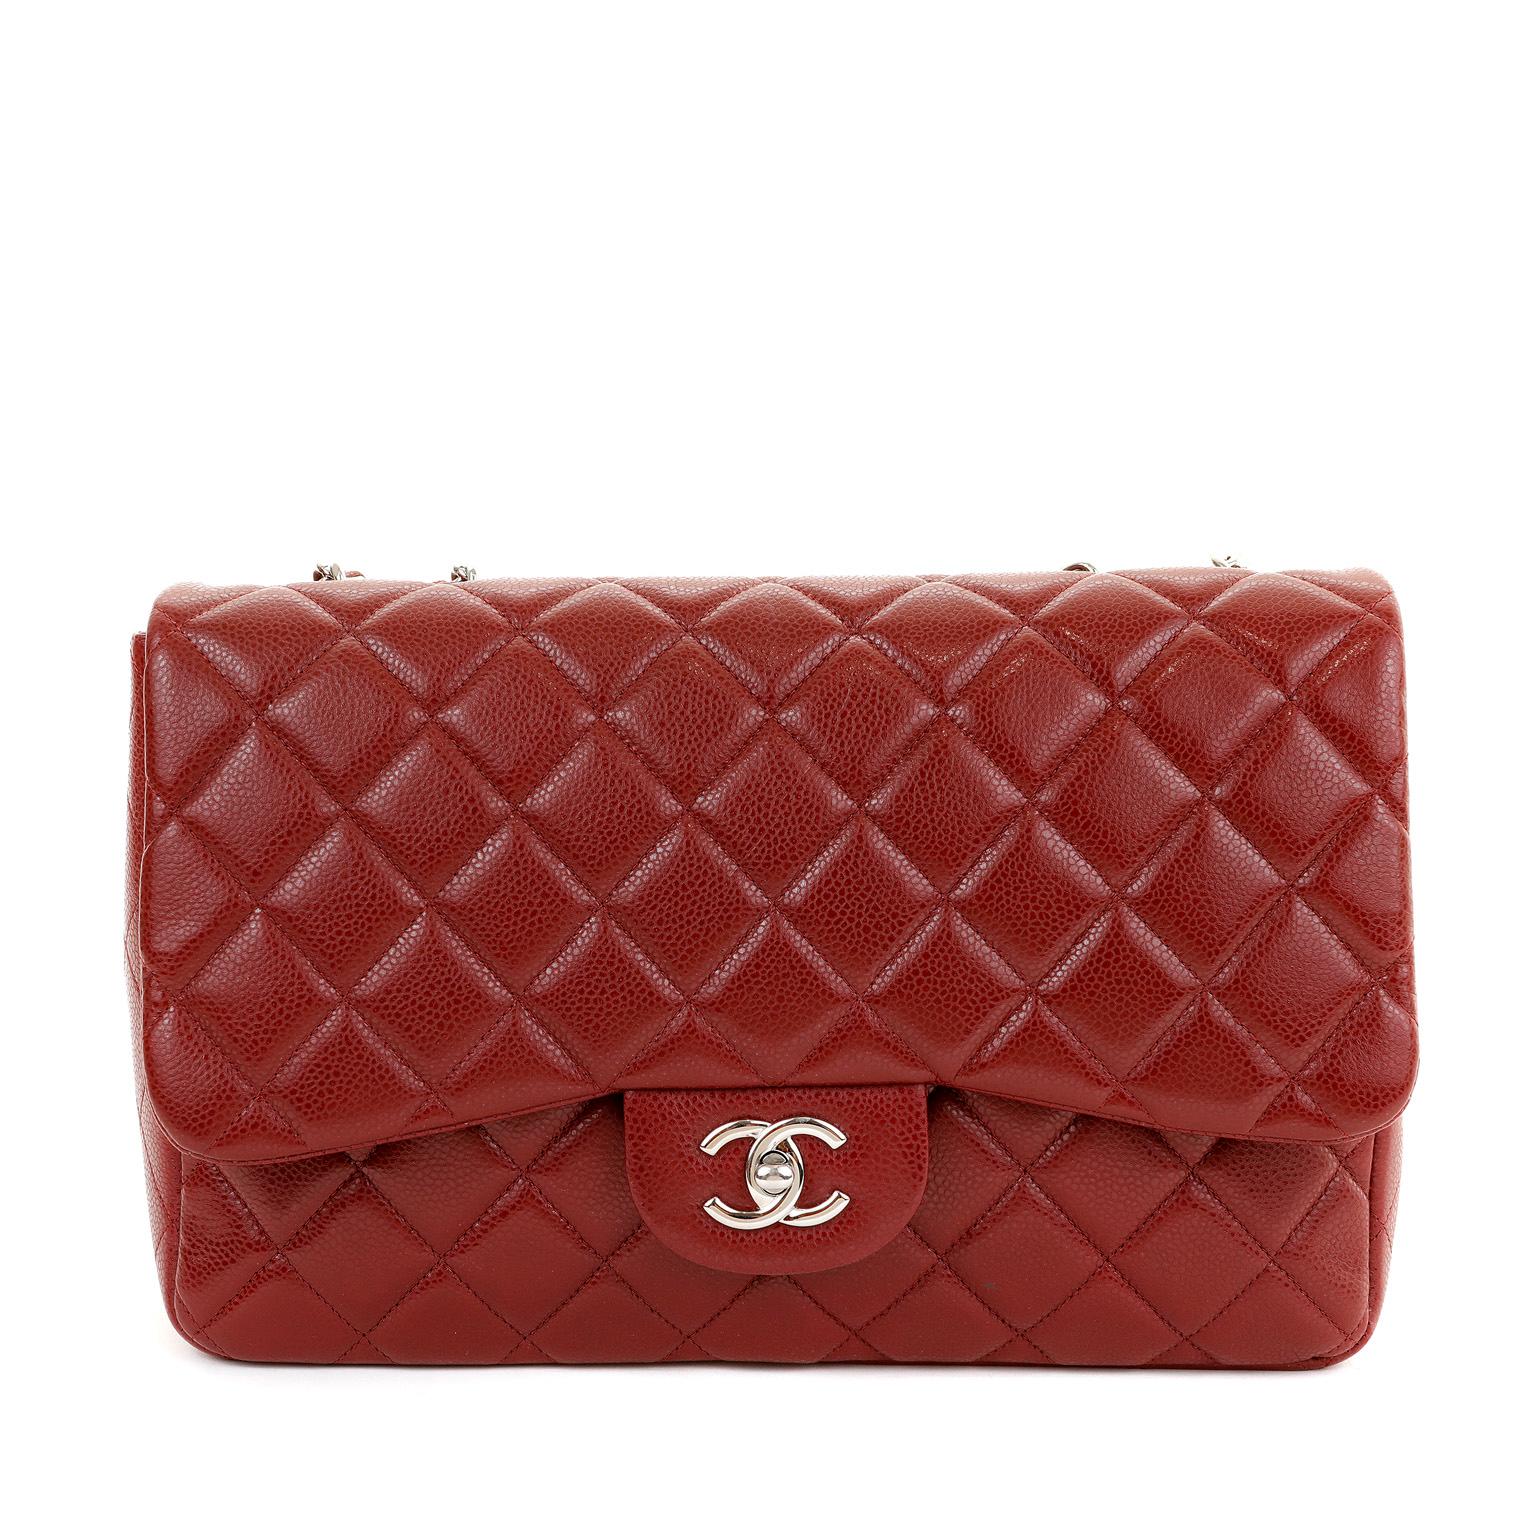 This authentic Chanel Dark Red Caviar Jumbo Classic Flap Bag is in pristine condition.  A key piece in any sophisticated wardrobe, the Classic Flap is one of the most sought-after Chanel styles produced.

Durable and textured deep red caviar leather